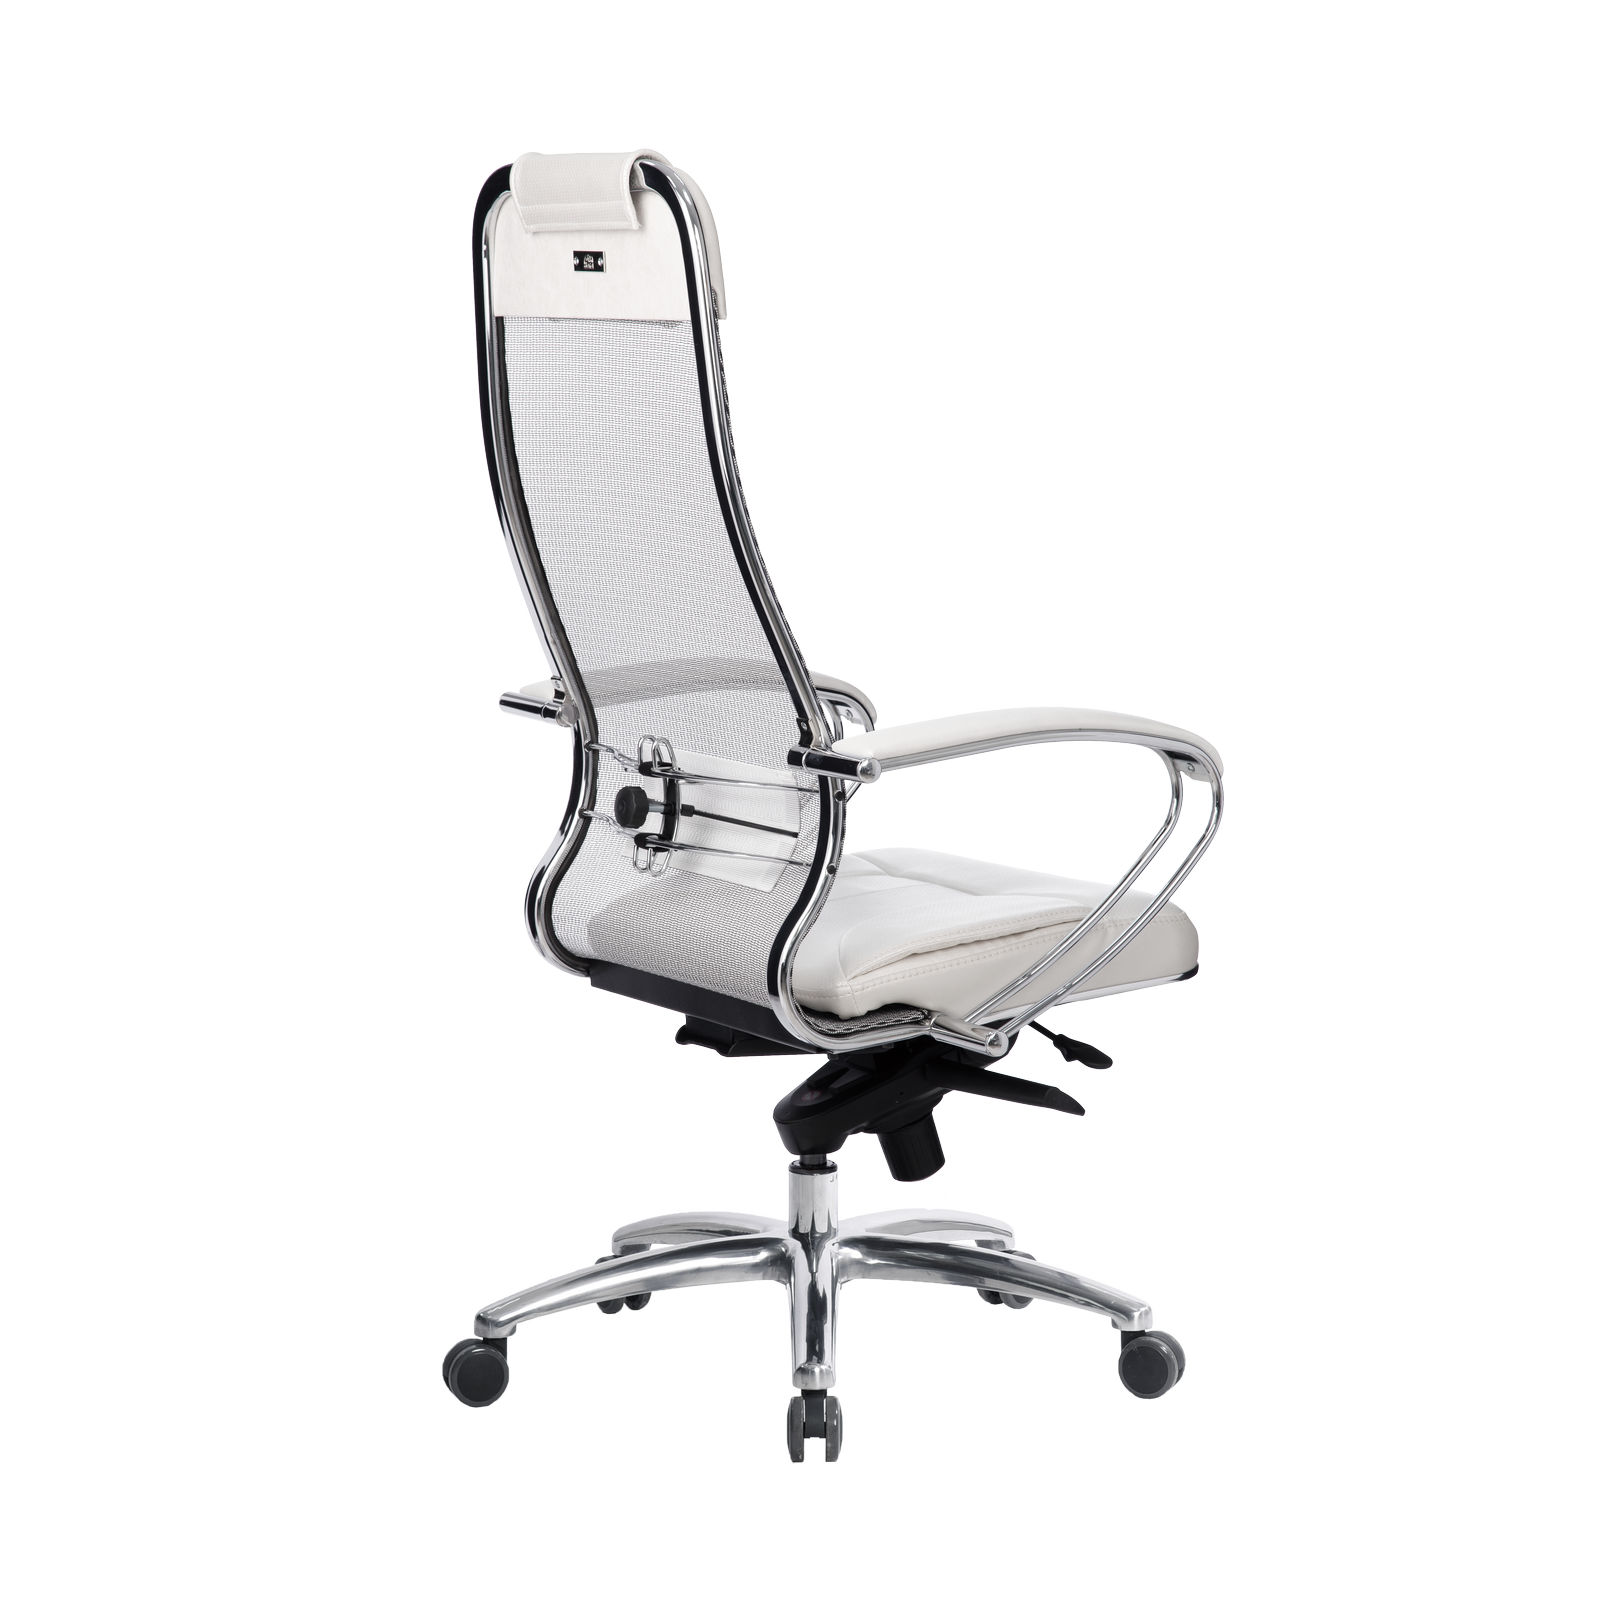 Executive chairs 3